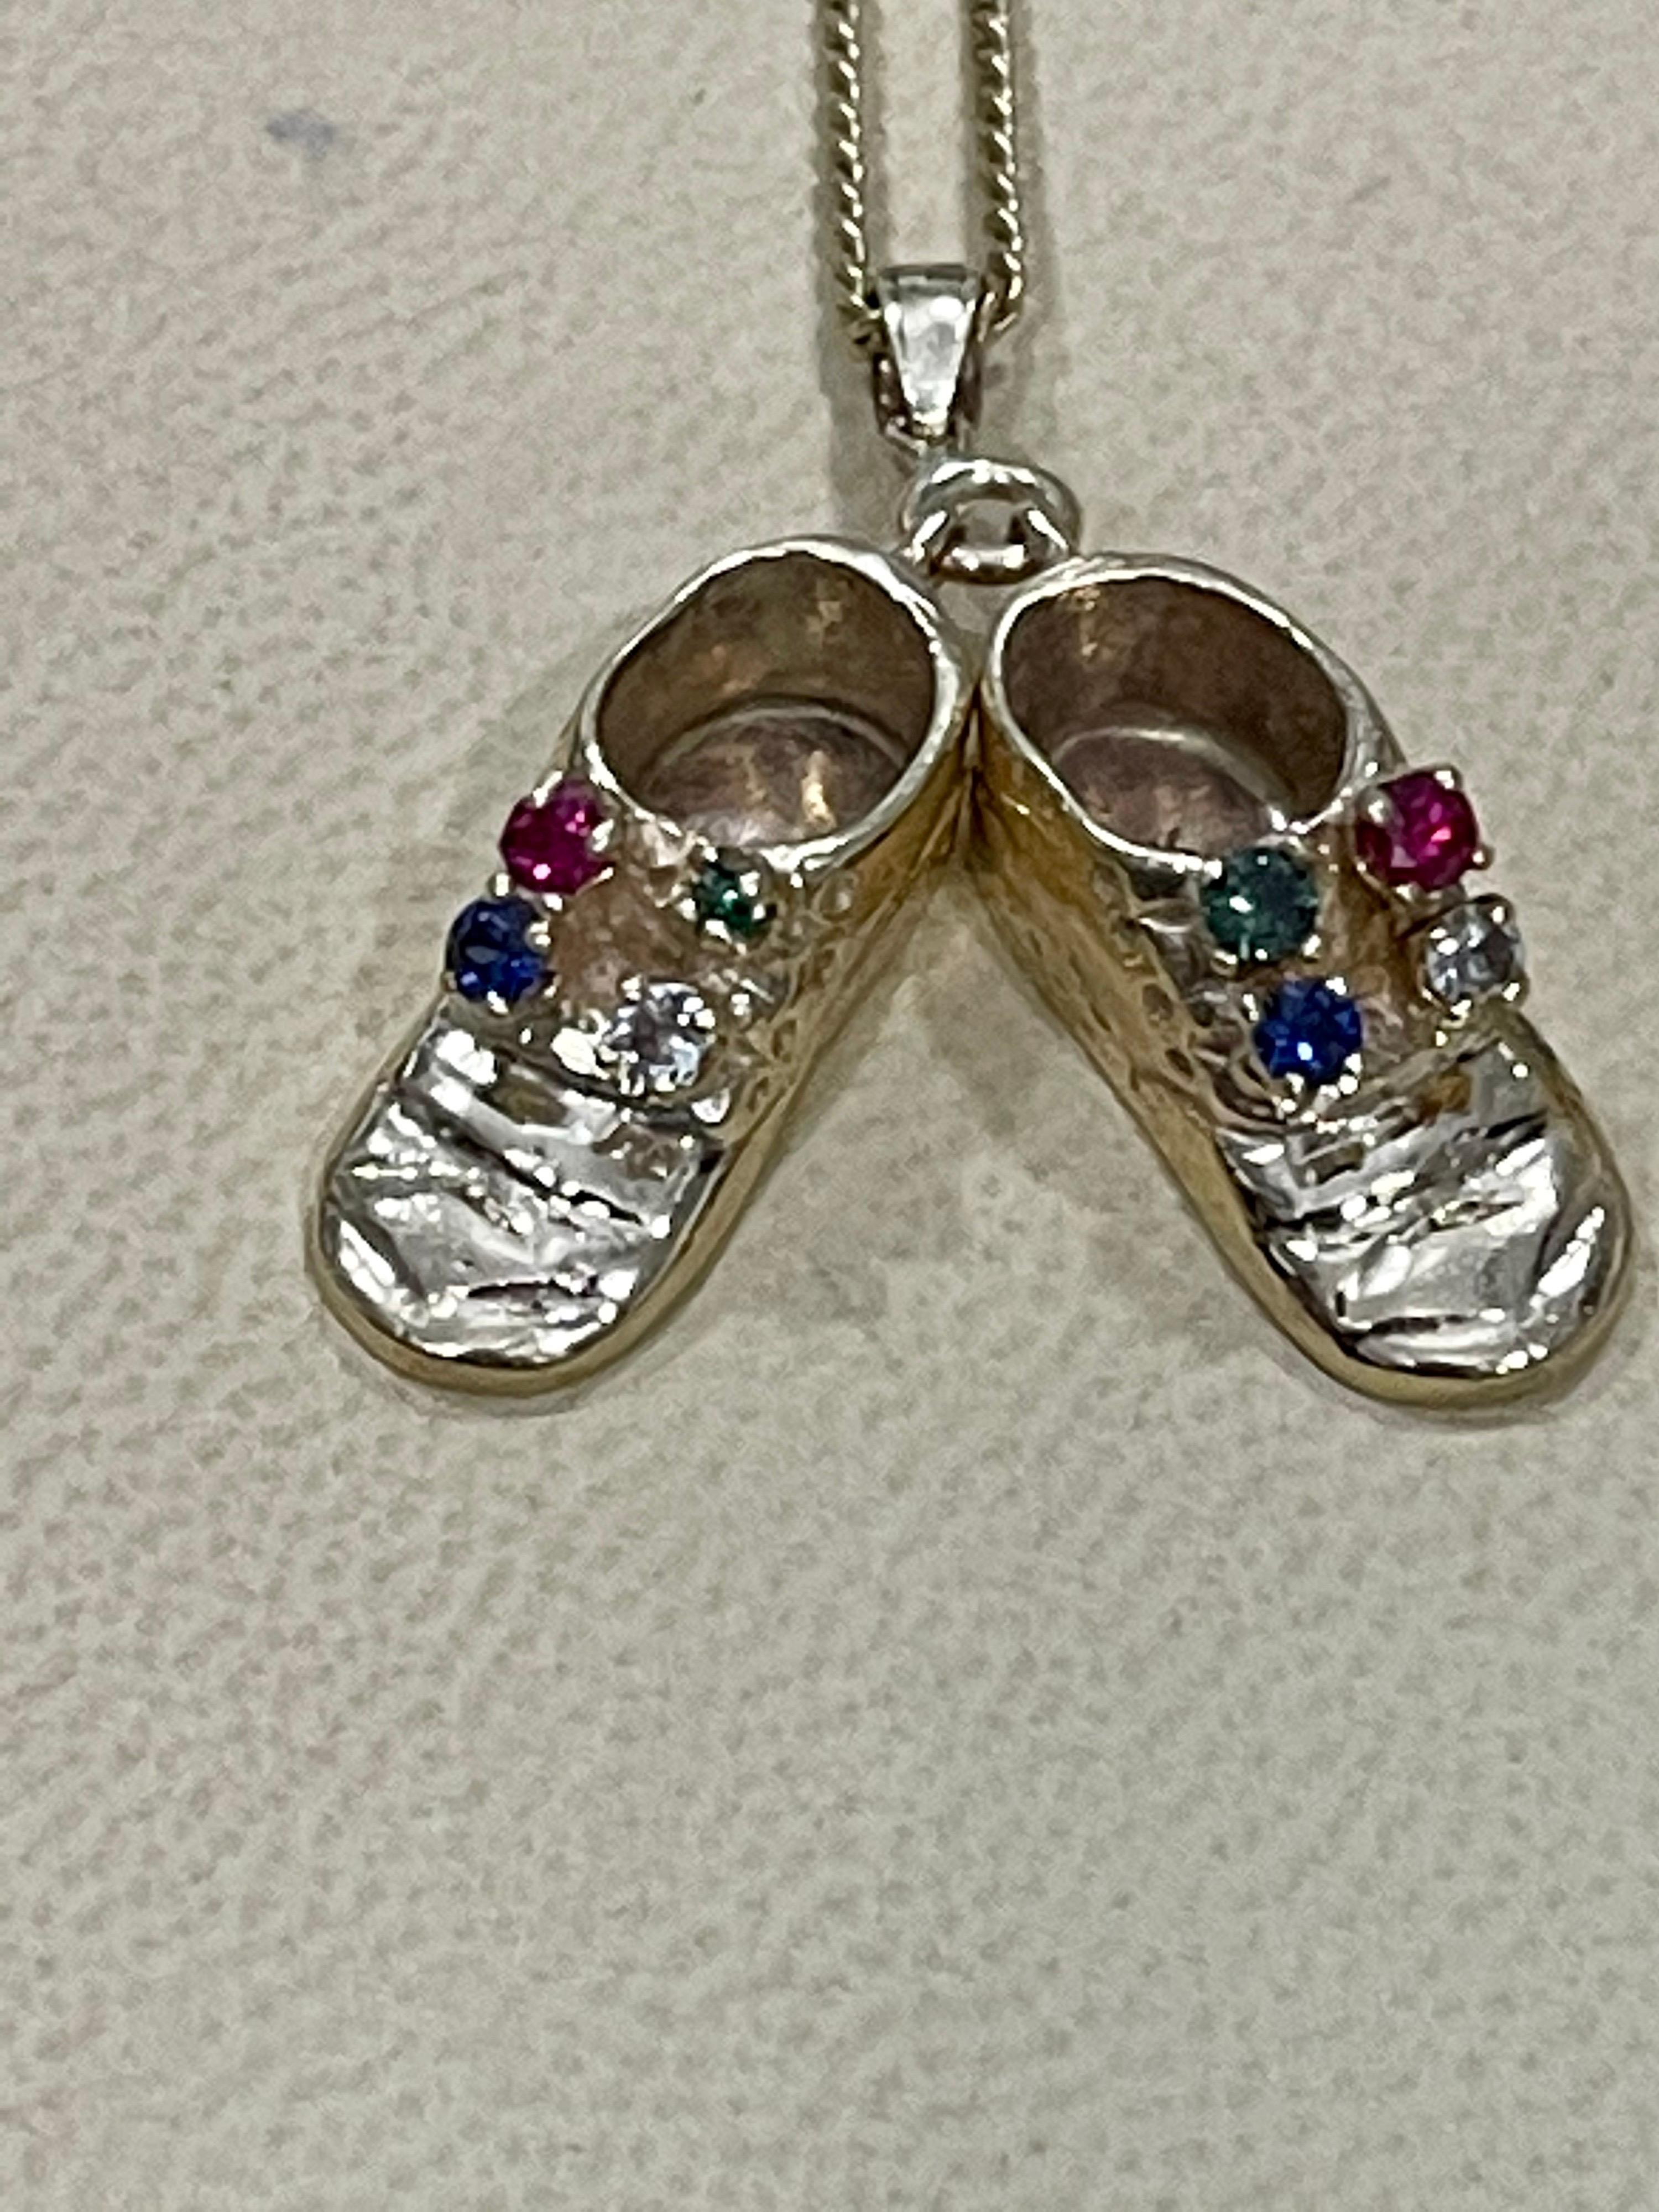  Pair of shoe charms With precious Stone Pendant Necklace With Yellow Gold Chain
This spectacular Pendant Necklace  consisting of a Pair of shoes which can be engraved with your children names.
Right now it has names Gail and Carolyn which can be